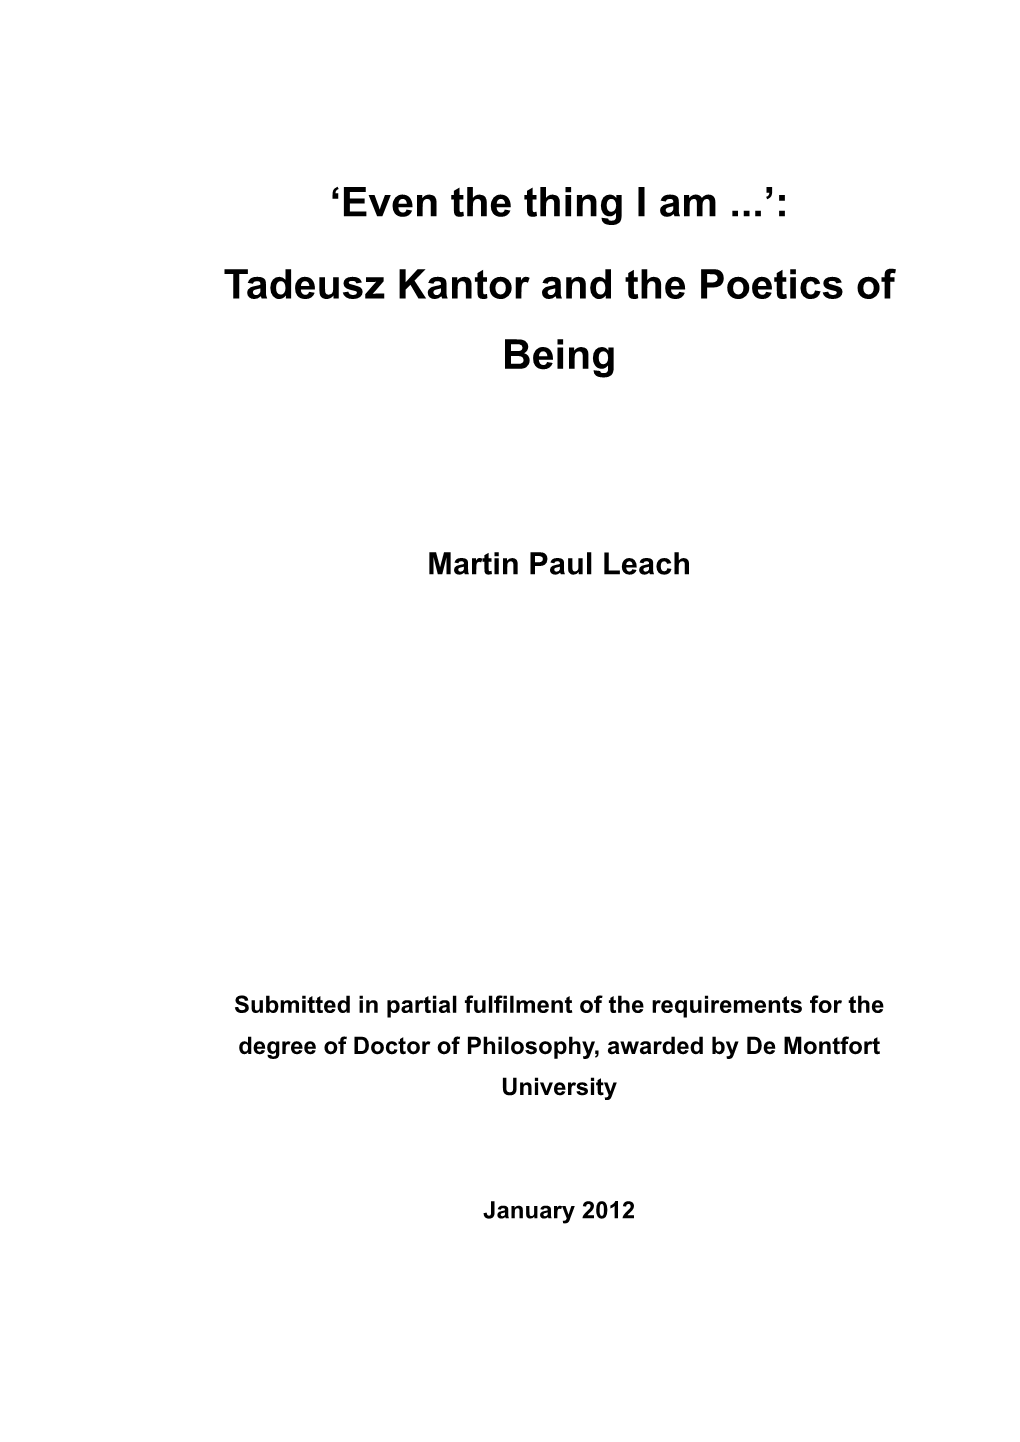 Tadeusz Kantor and the Poetics of Being